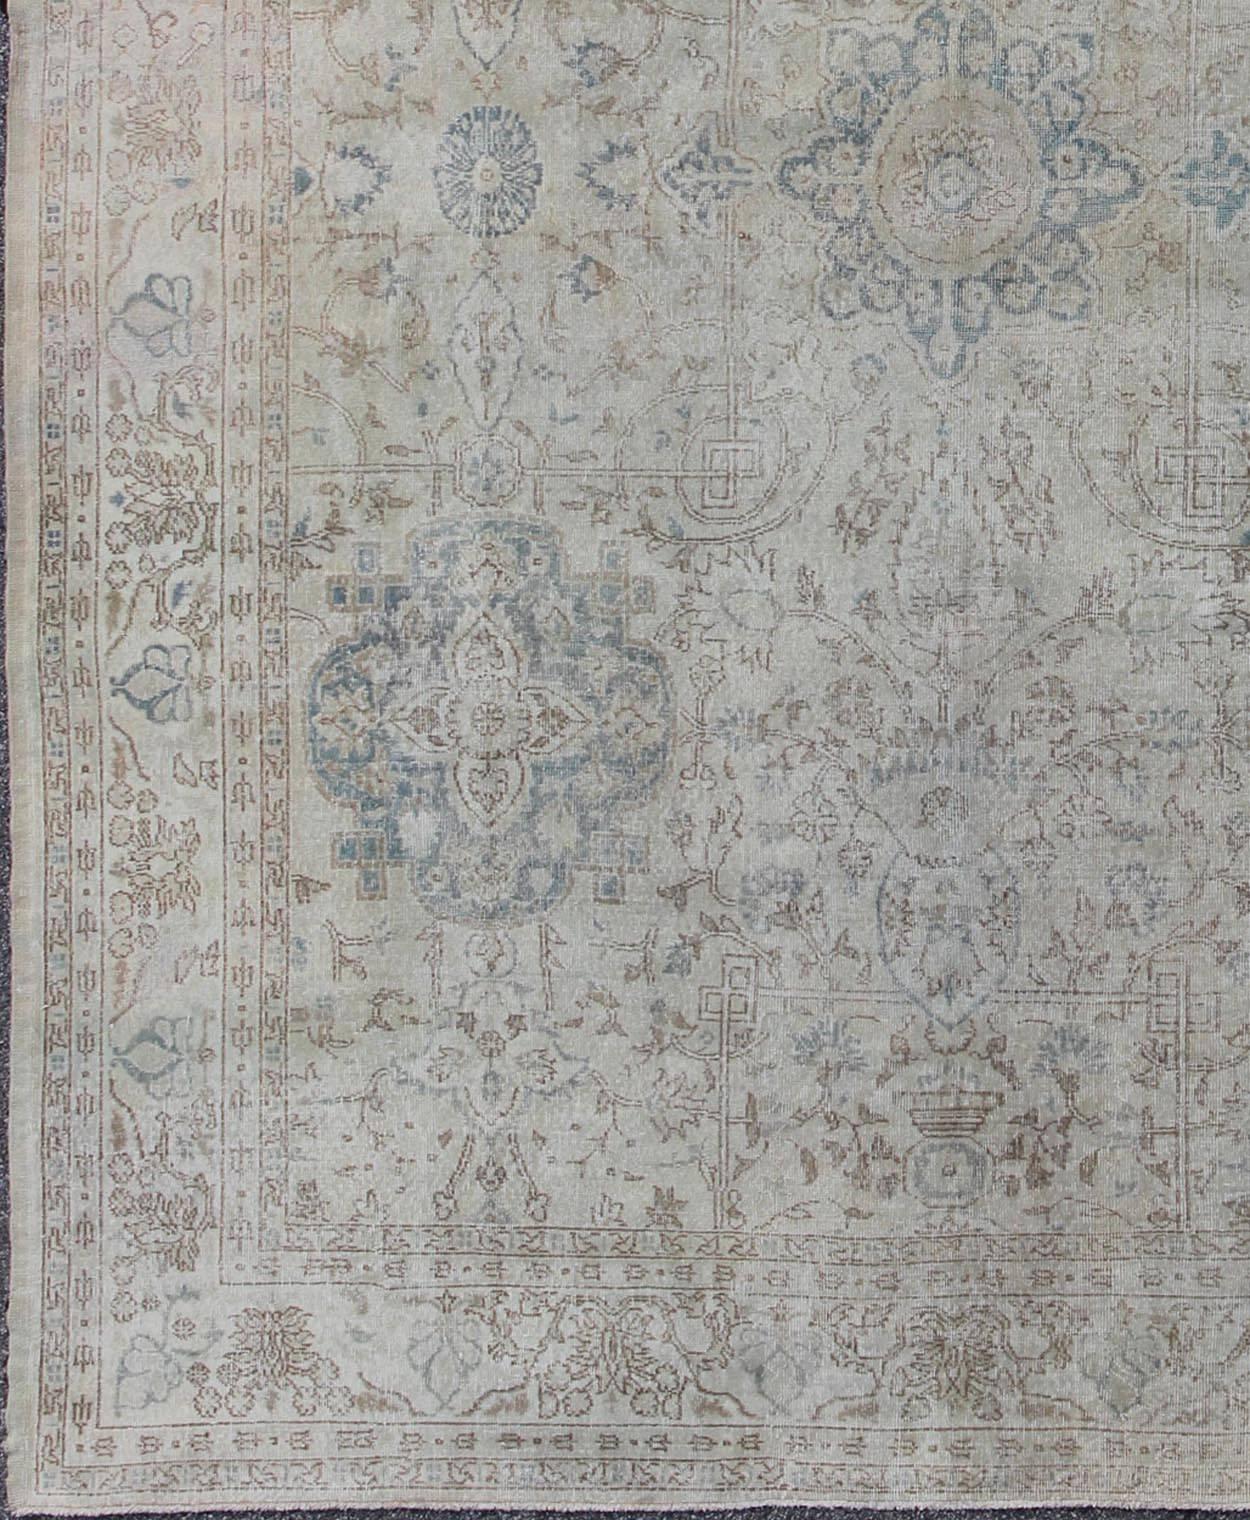 This beautiful Oushak carpet showcases the skillful workmanship of Turkish weavers. Set on an all-over ivory background, this piece consists of sublimely delicate patterns of palmettes and arabesque tendrils in soft tones of blue, camel and wheat,